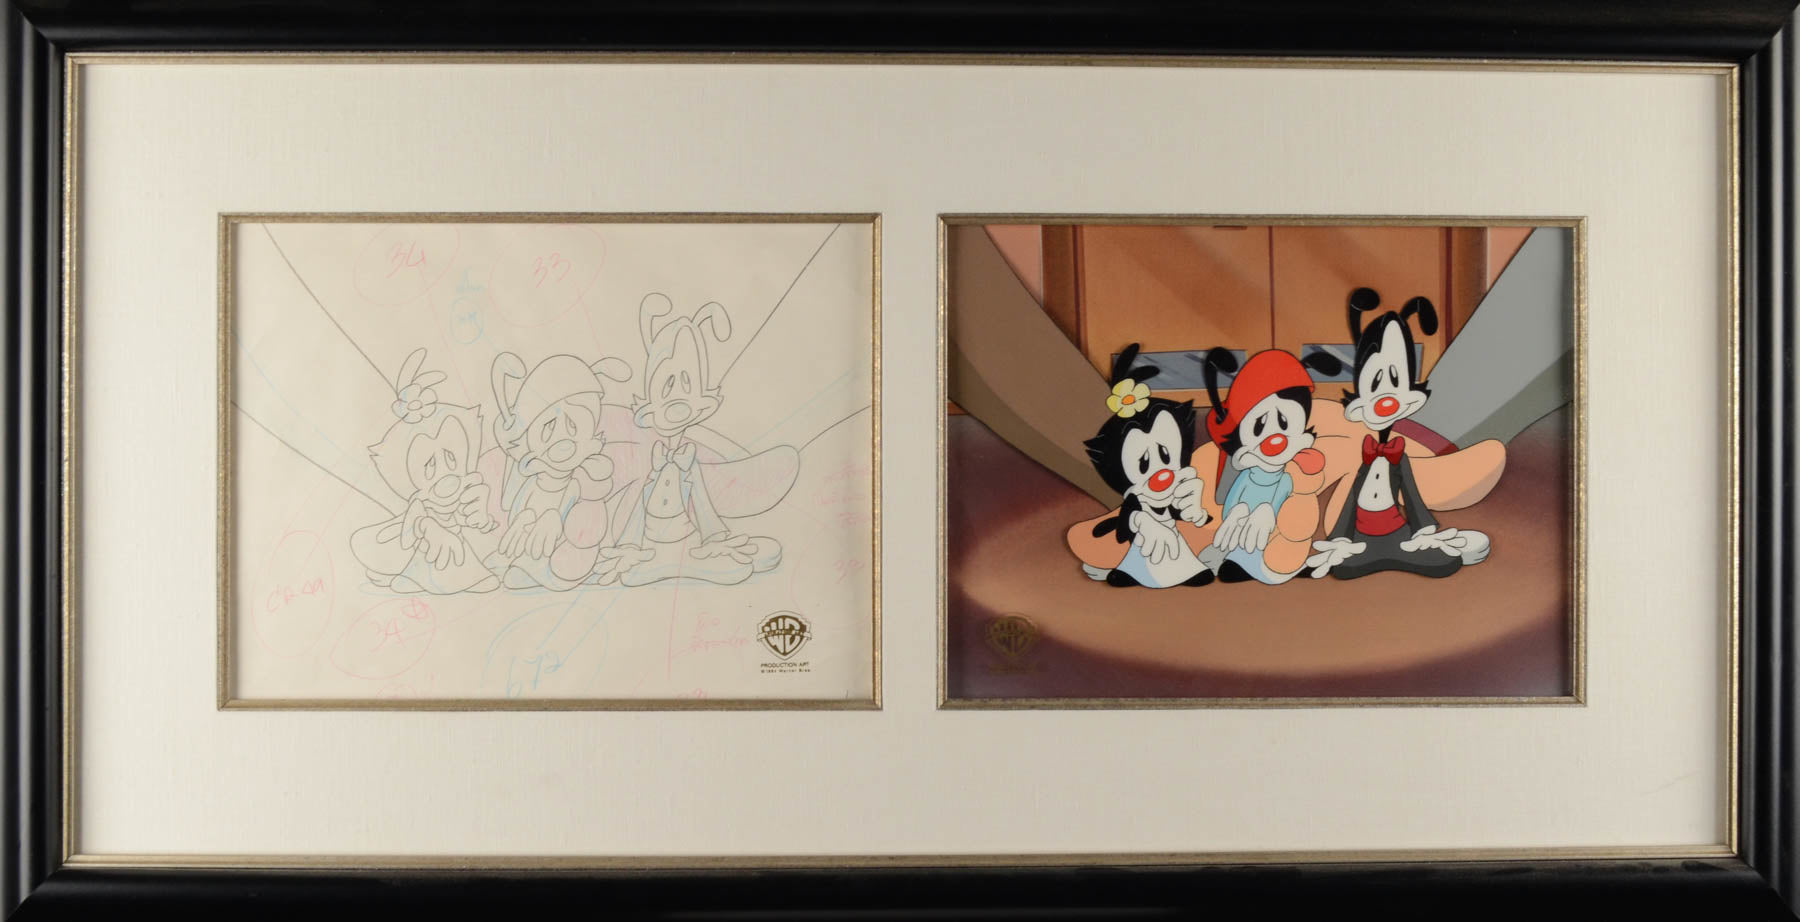 Looney Tunes Original Production Cel with Matching Drawing: Speedy Gonzales